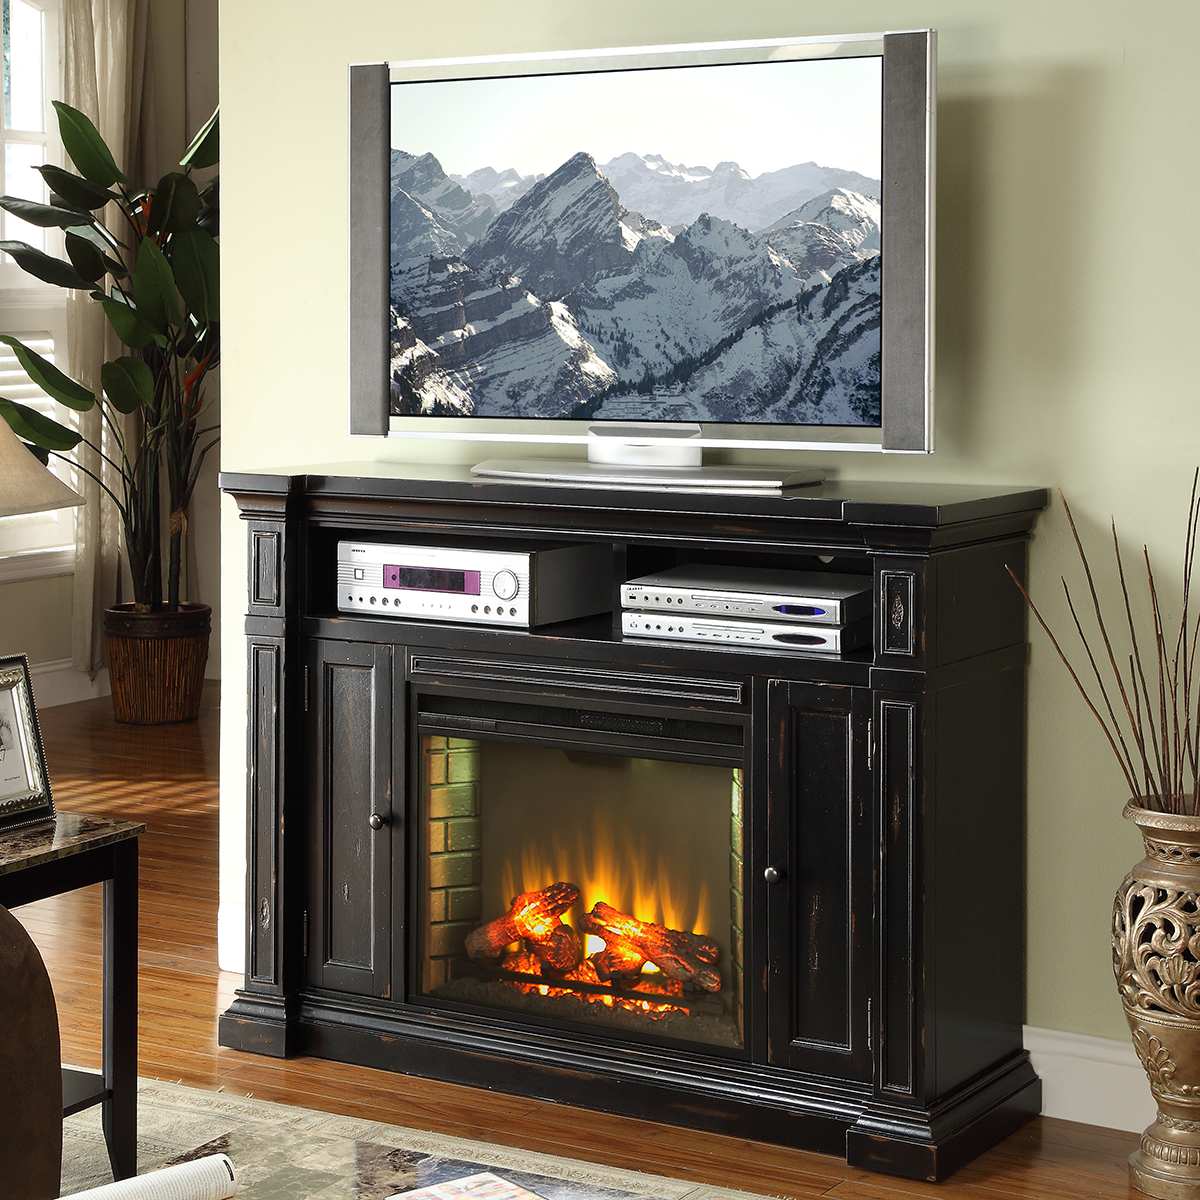 Fireplace Tv Stand with Remote Unique Manchester 58" Fireplace Media Center Tv Stand Mantel In